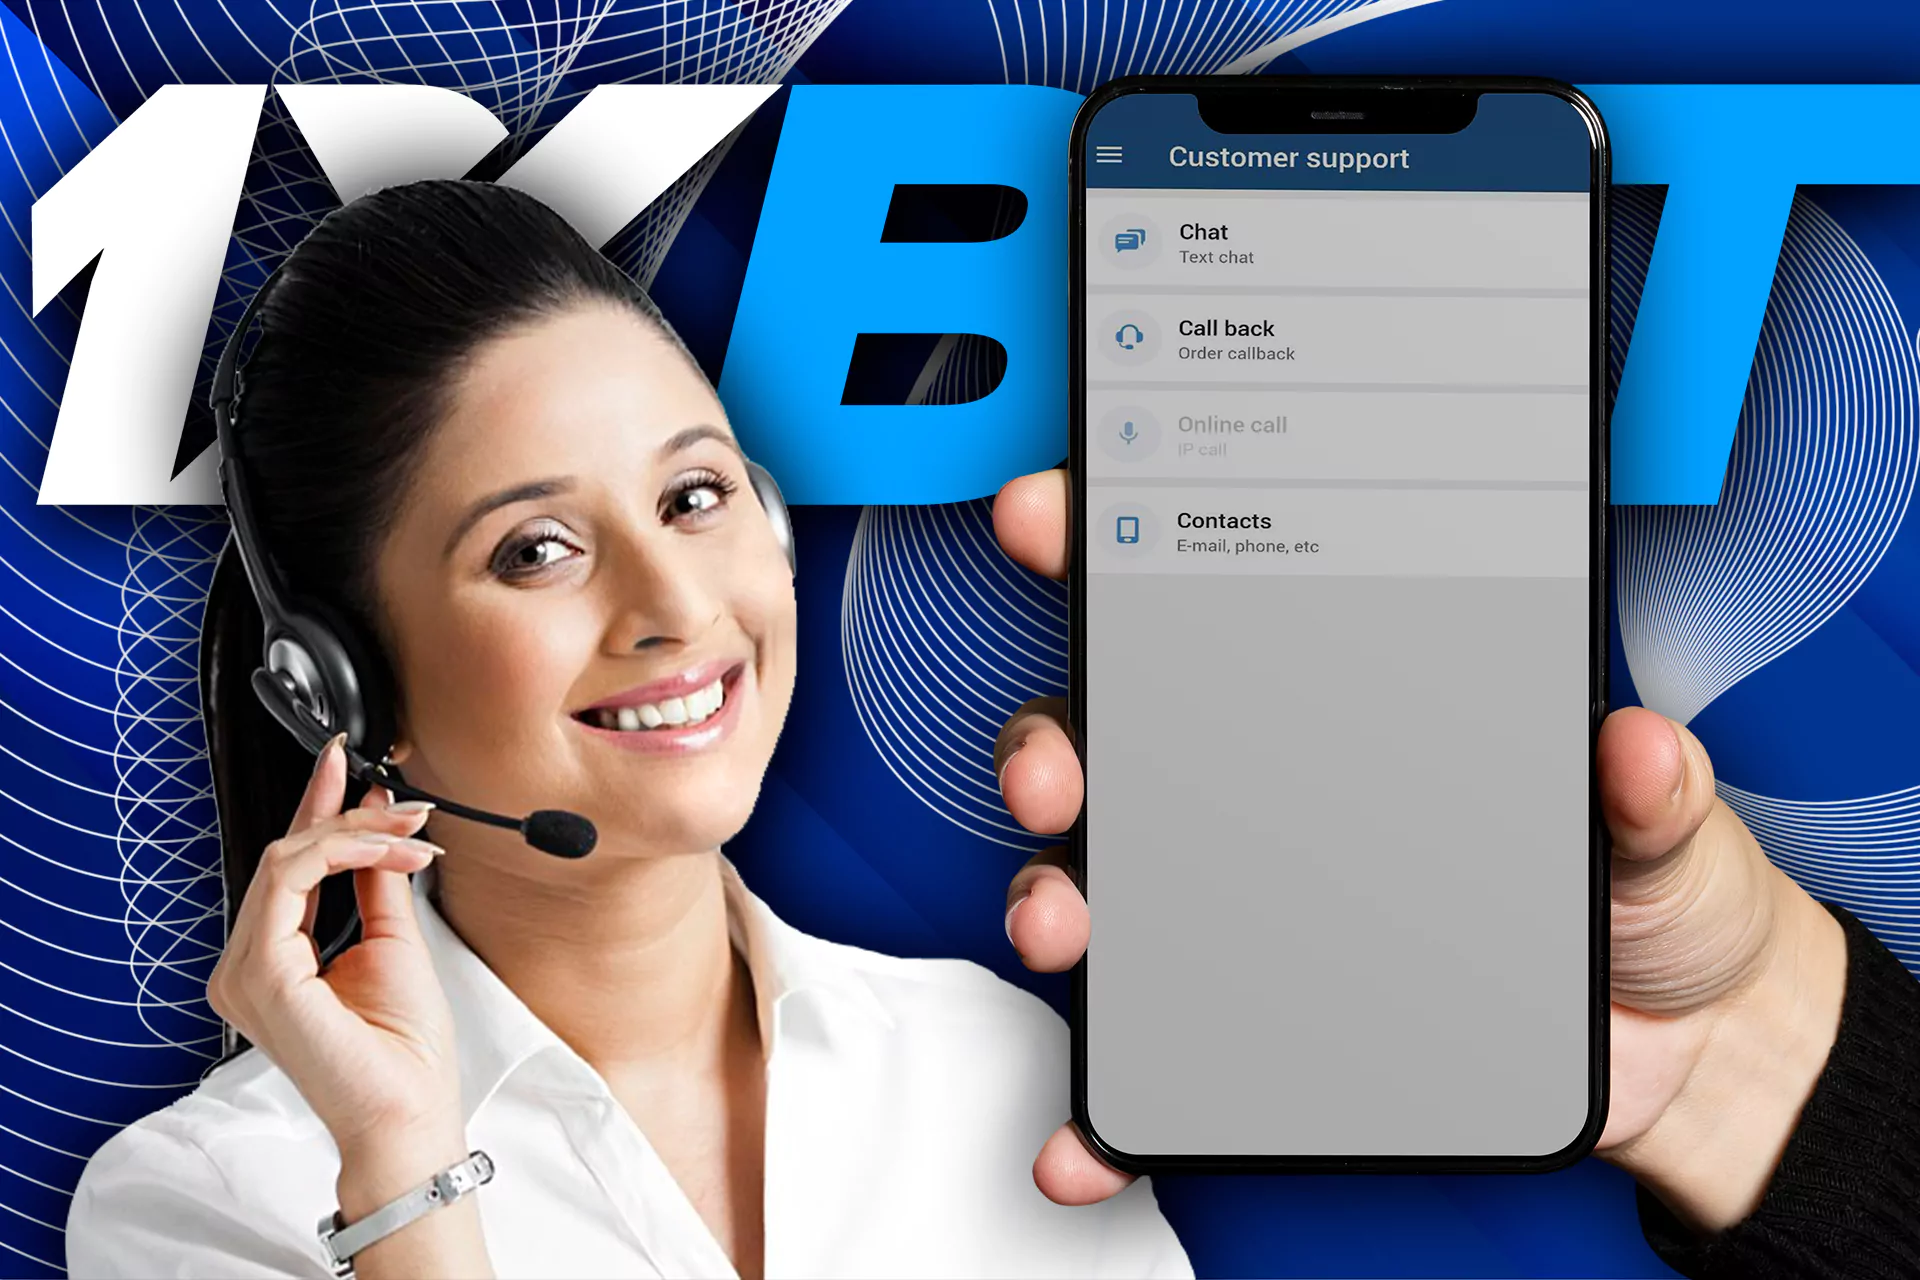 1xbet support team is there for you for 24/7.